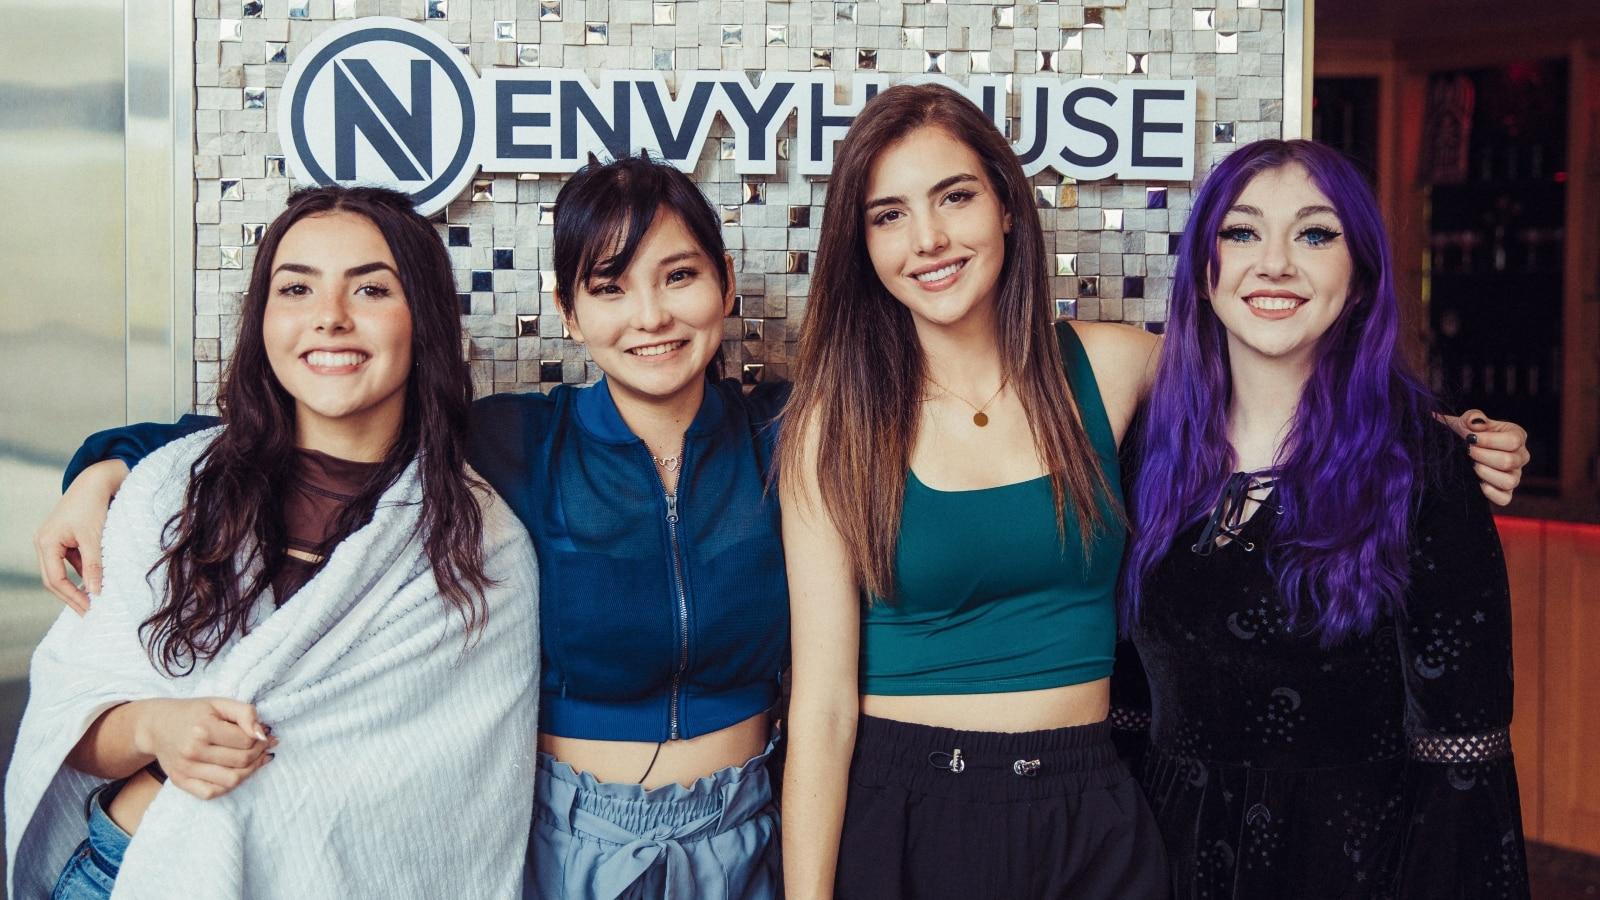 Botez sisters, justaminx and codemiko standing in front of envy house sign